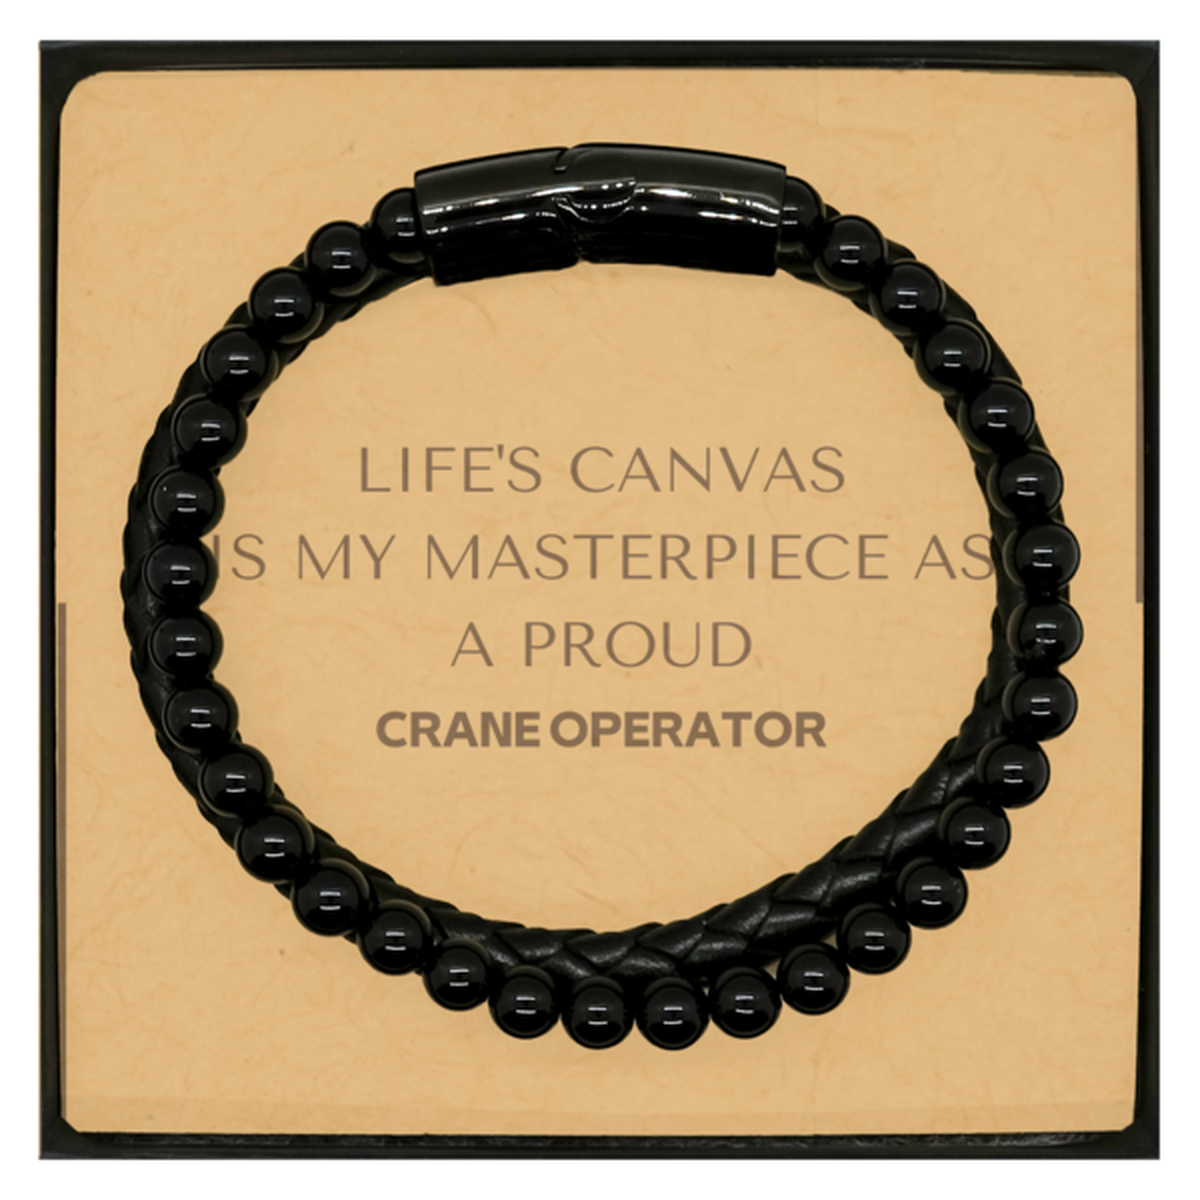 Proud Crane Operator Gifts, Life's canvas is my masterpiece, Epic Birthday Christmas Unique Stone Leather Bracelets For Crane Operator, Coworkers, Men, Women, Friends